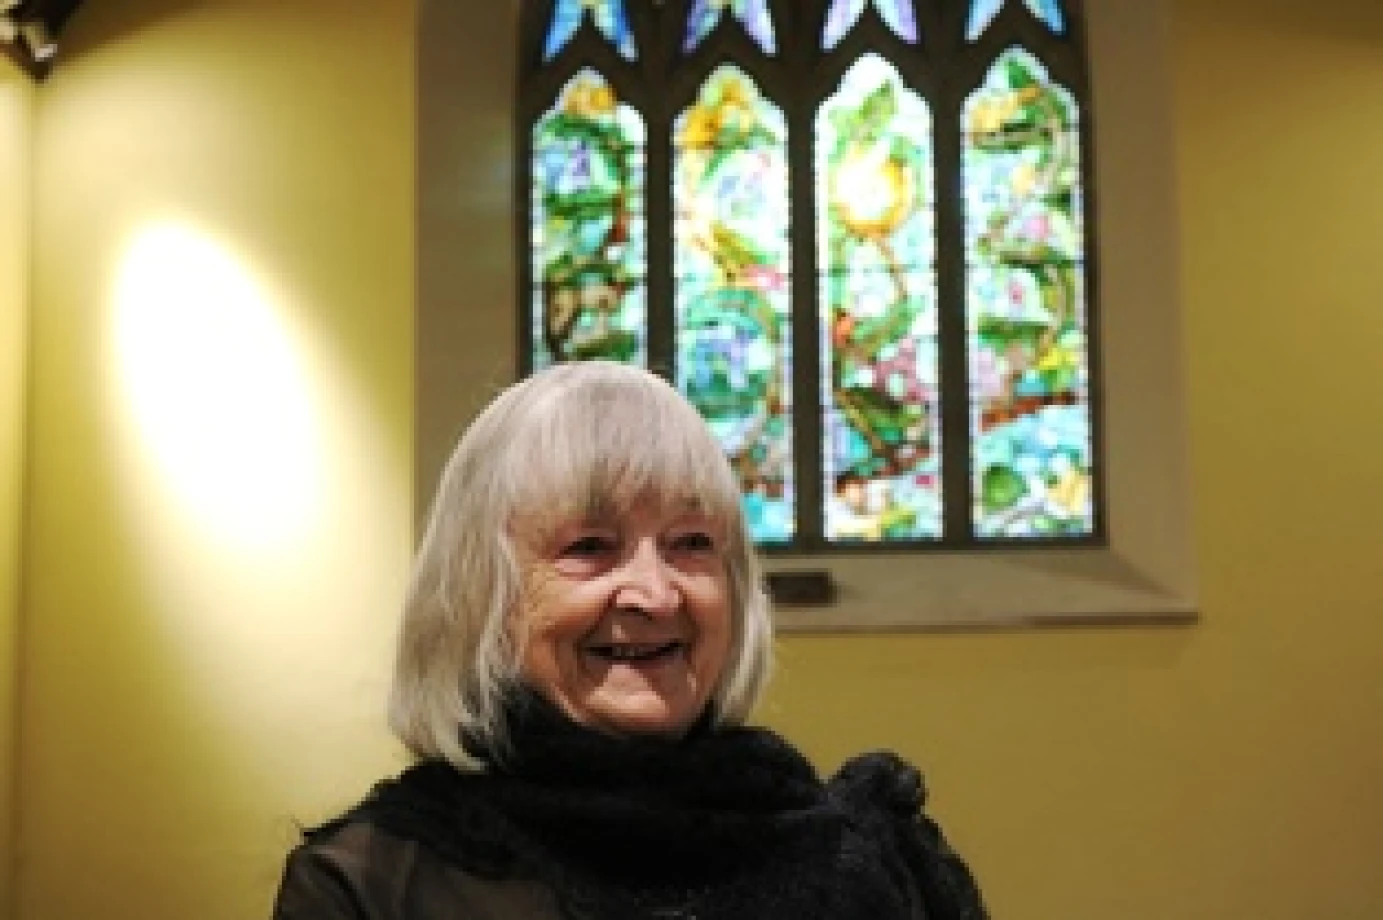 Artist visits her stained–glass window 53 years later